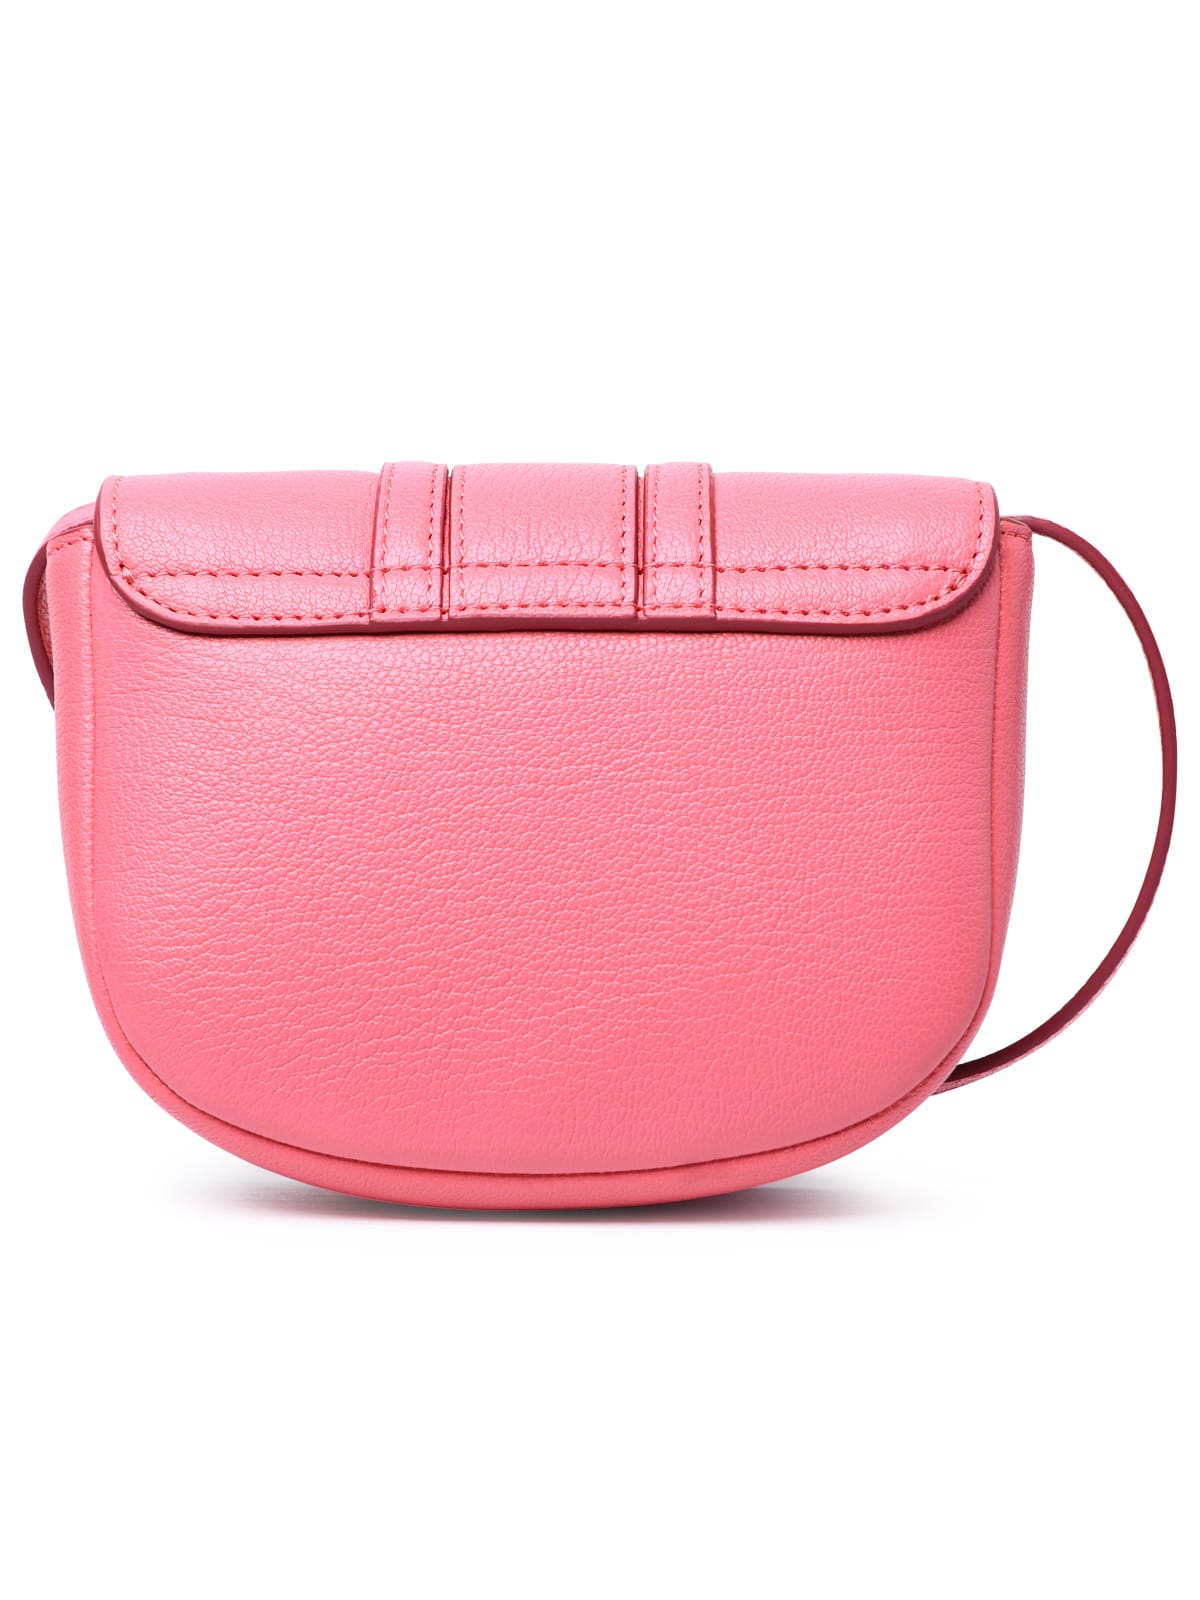 Shop See By Chloé Hana Pink Small Leather Bag